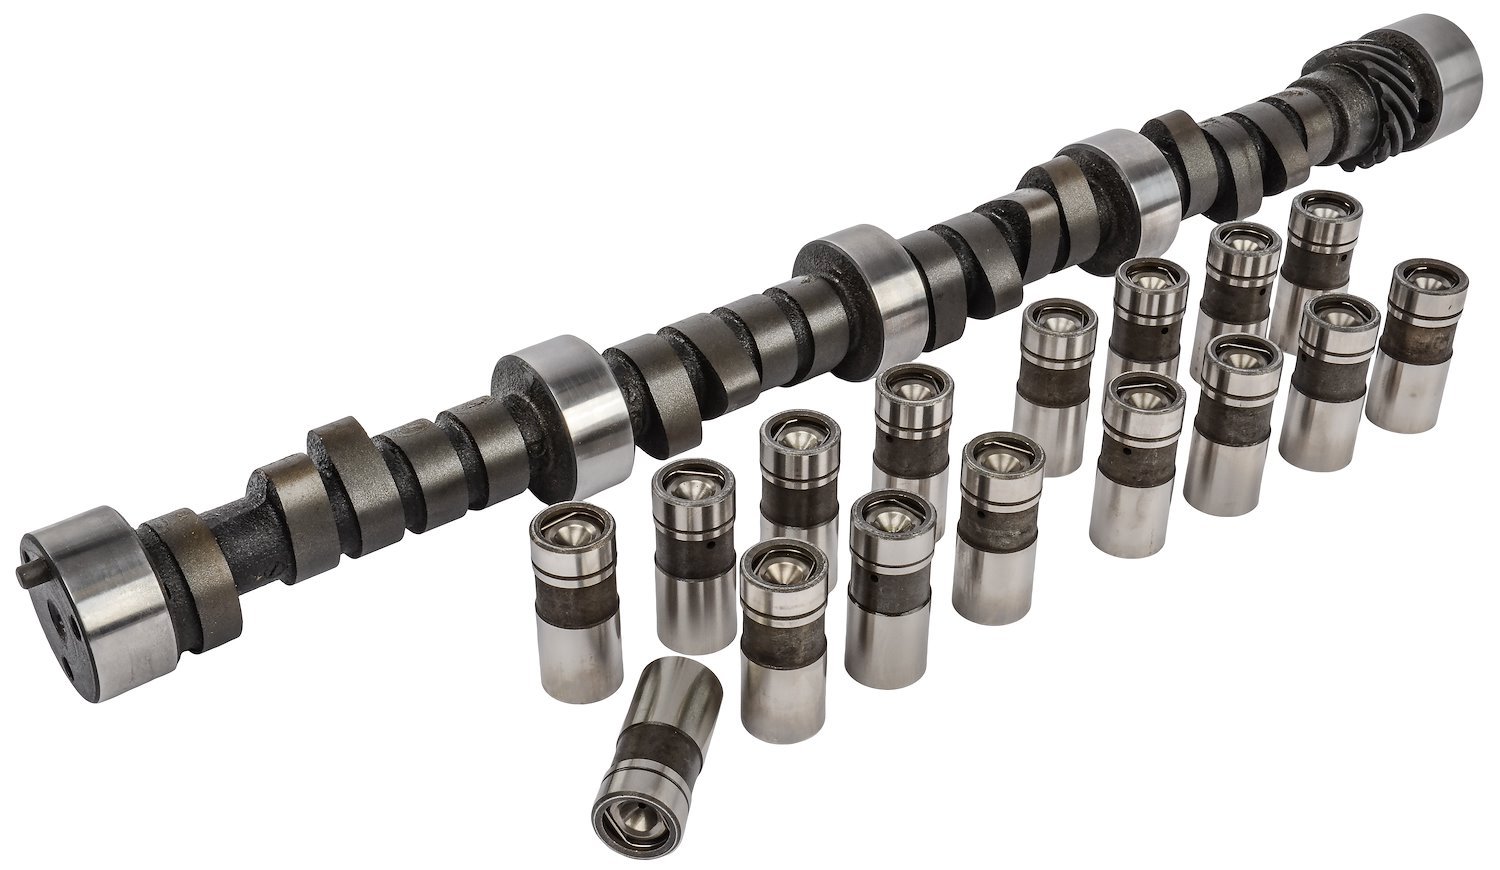 Hydraulic Flat Tappet Camshaft and Lifters 1957-1985 Small Block Chevy 262-400 ci [2200-5200 RPM Range]